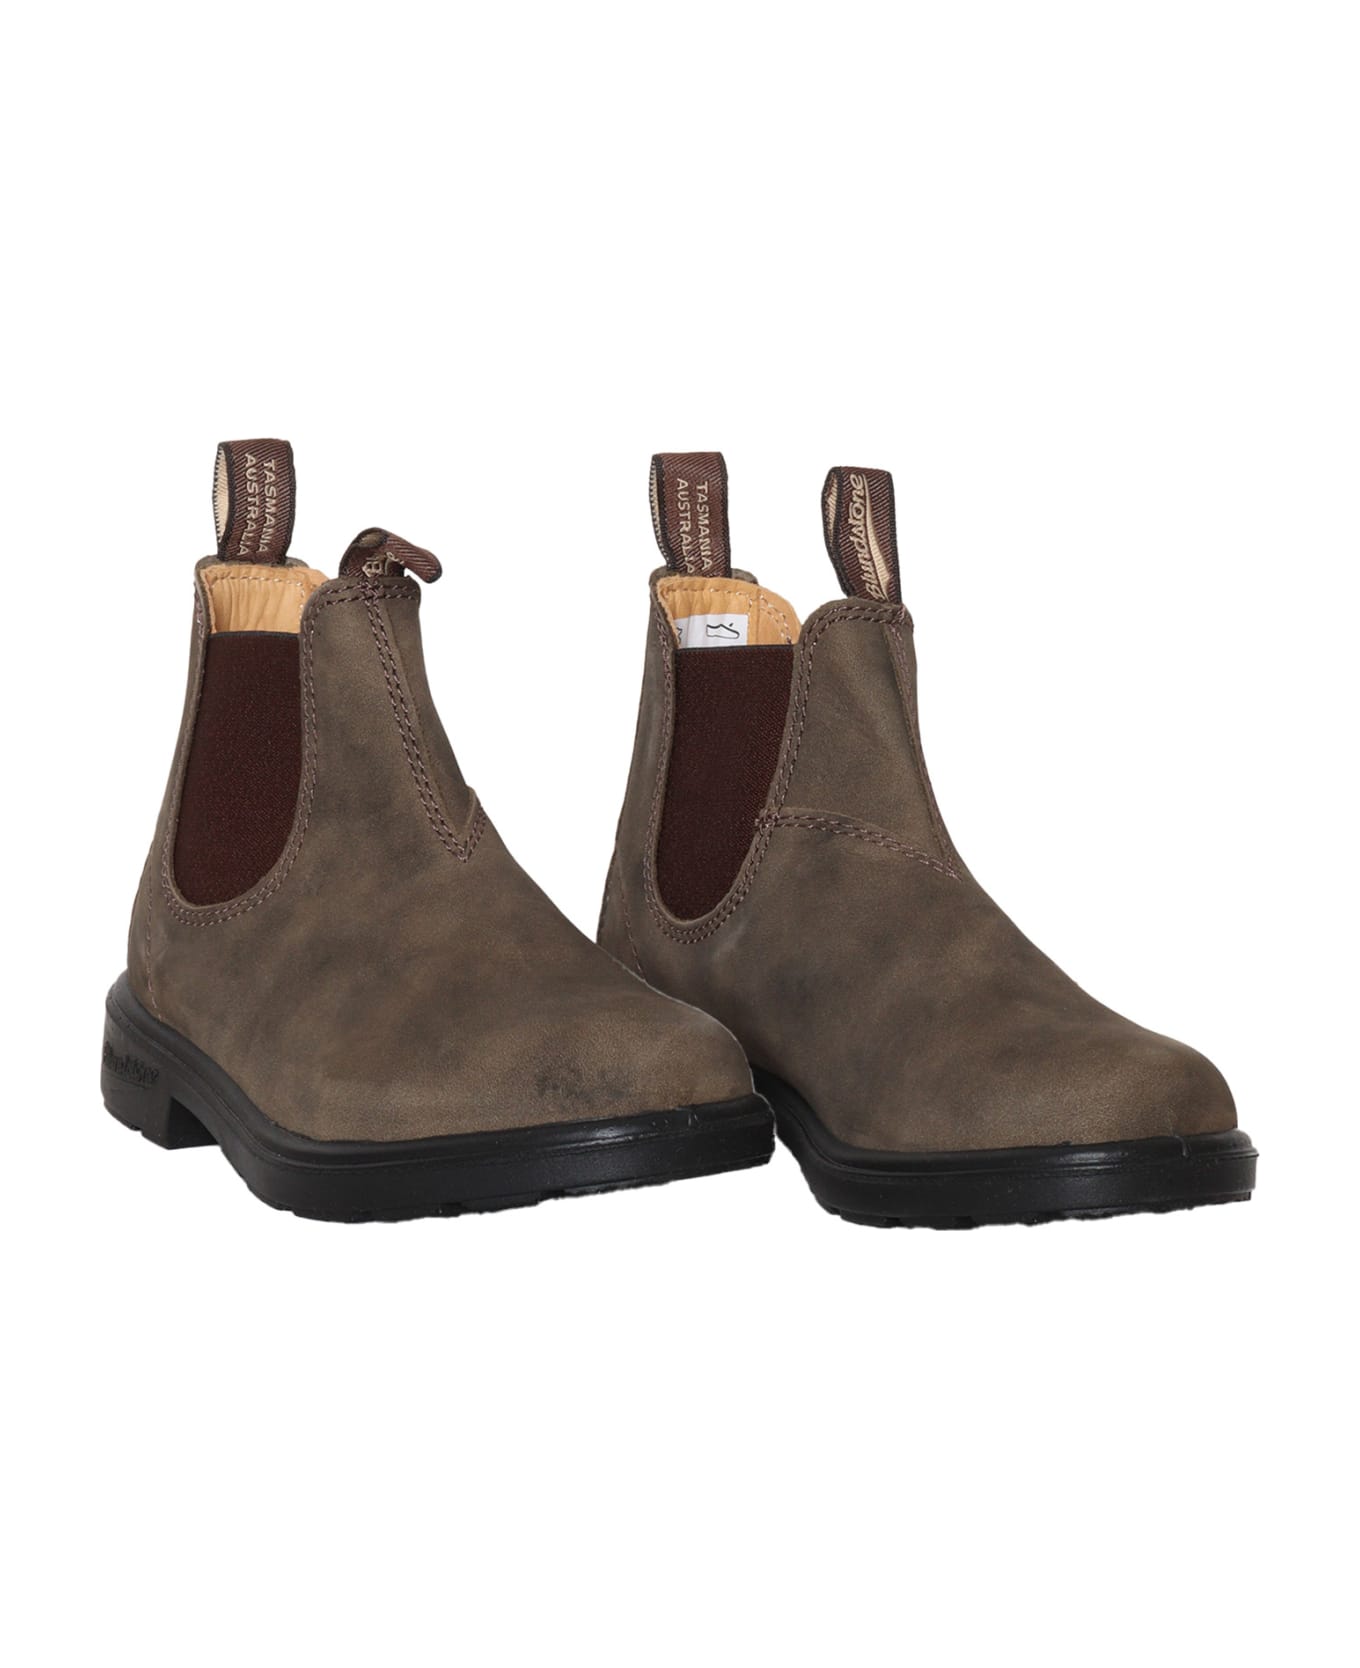 Blundstone Rustic Ankle Boots - BROWN シューズ